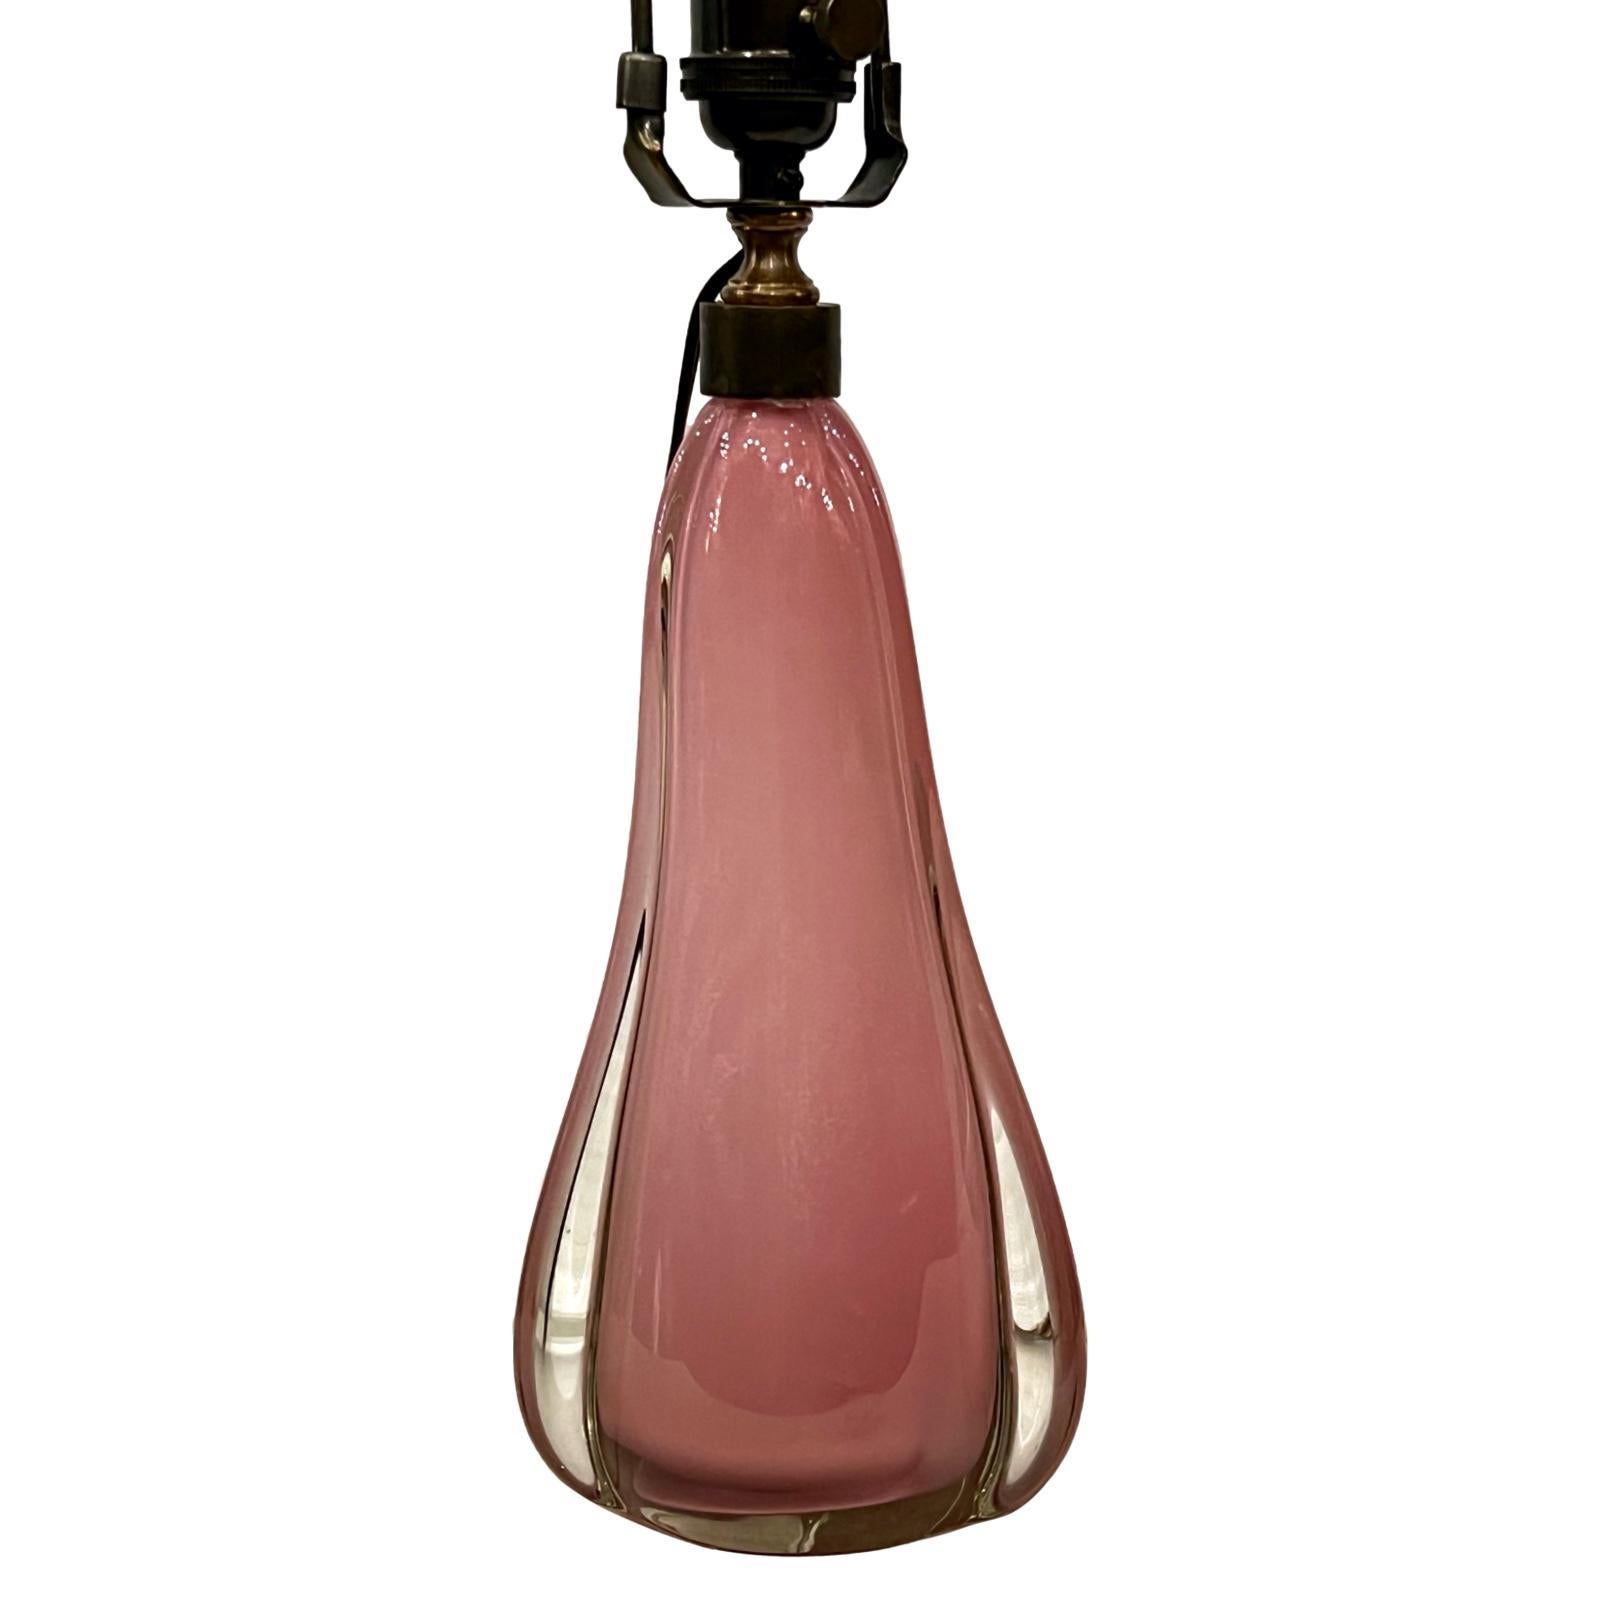 A circa 1950's pink Murano glass lamp

Measurements:
Height of body: 12